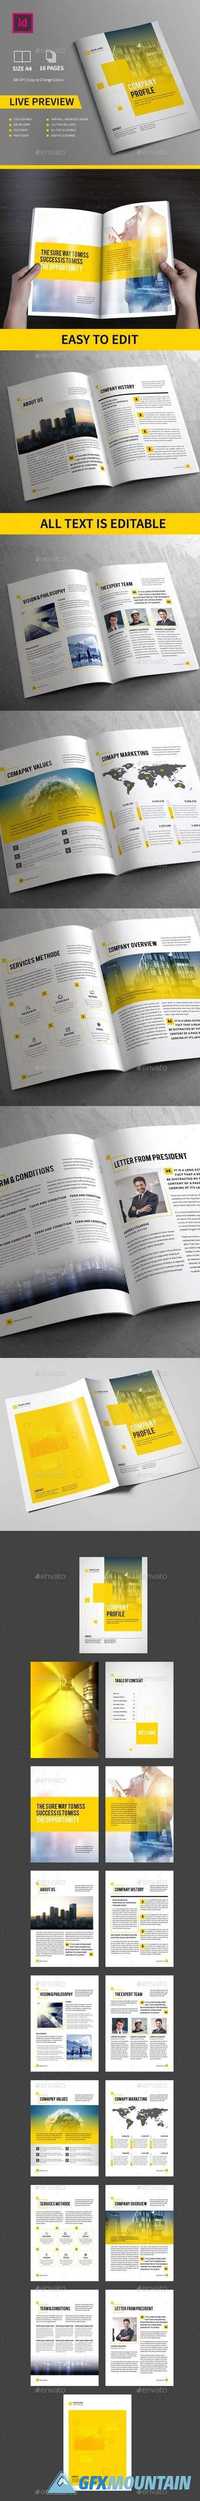 Multipurpose Corporate Brochure 16 Pages A4 13480865